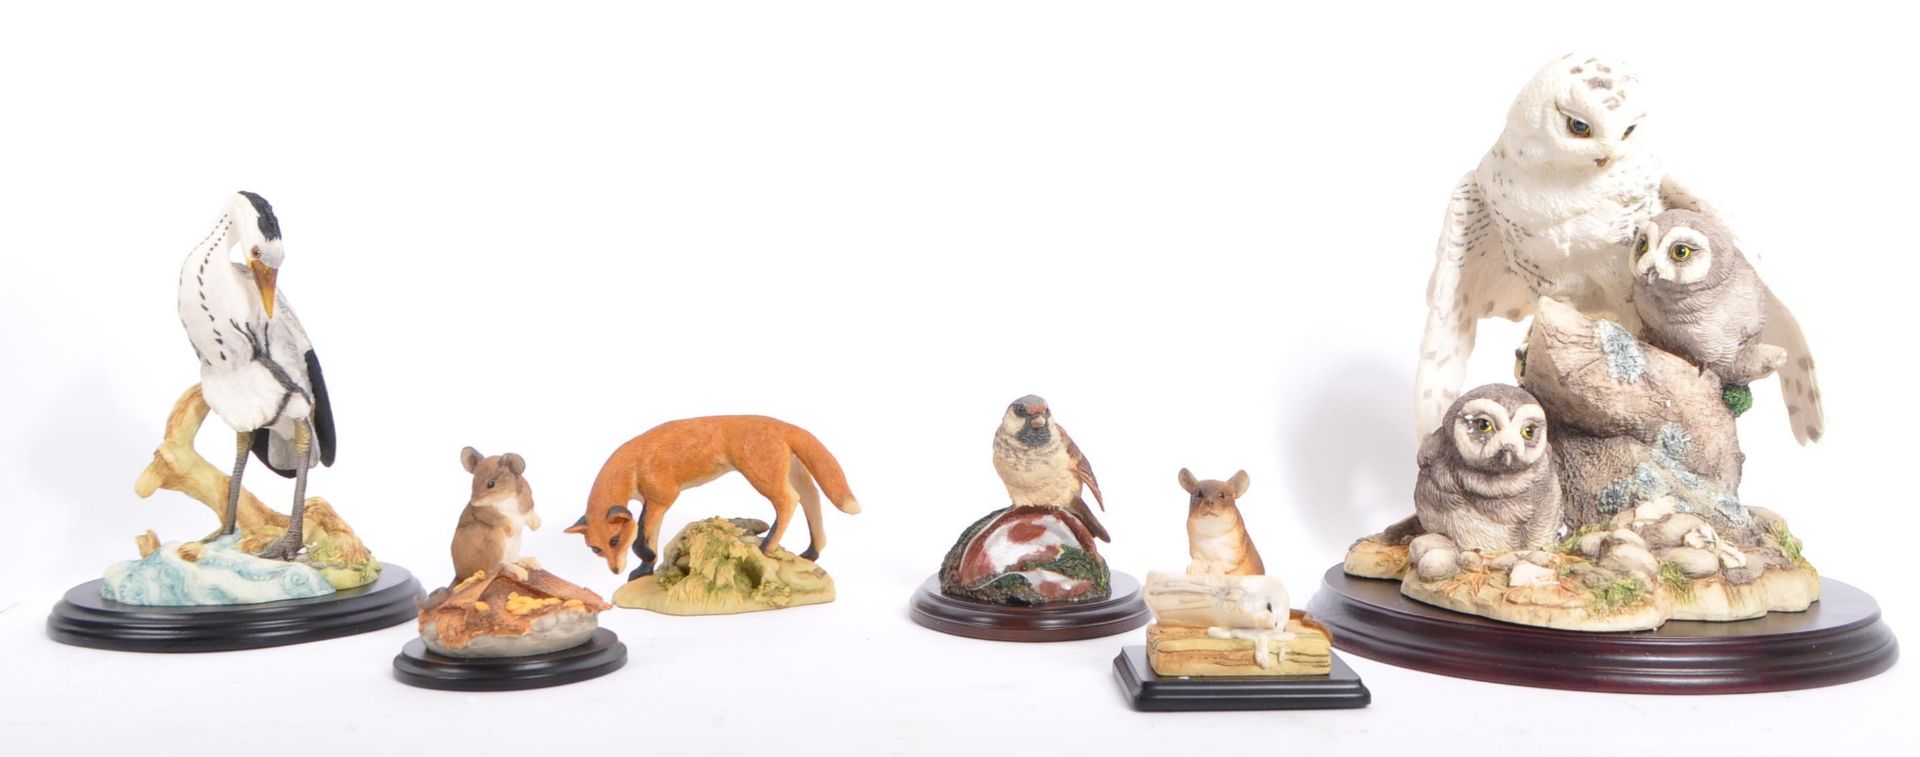 COLLECTION OF VINTAGE TEVIOTDALE RESIN ANIMAL FIGURES - Image 6 of 7